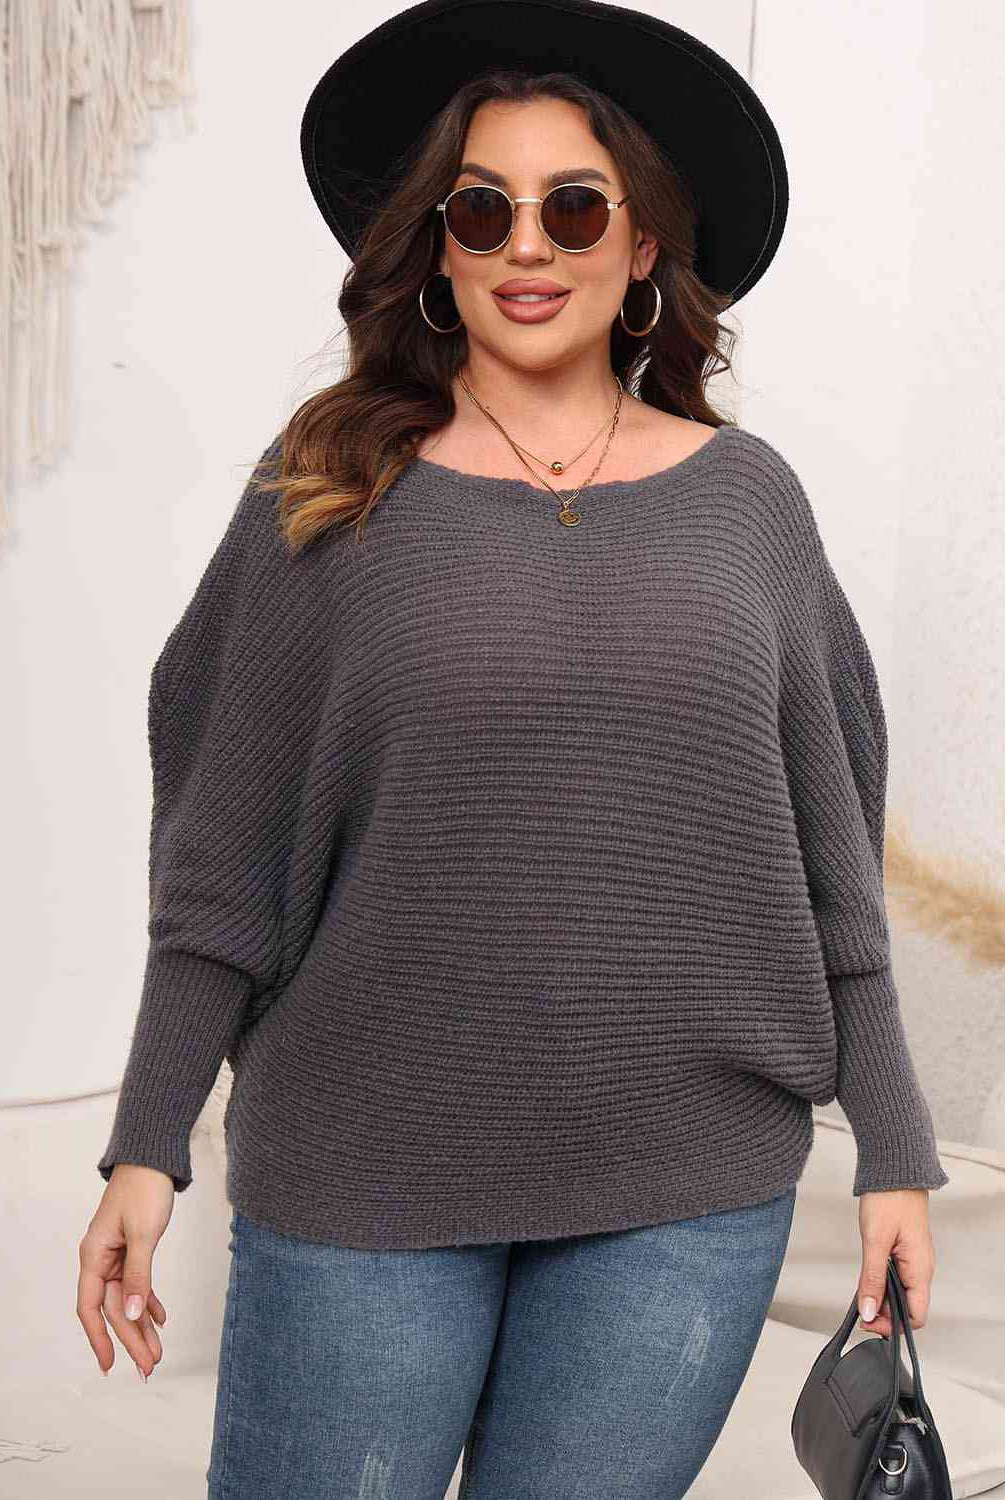 Light Gray Full Size Boat Neck Batwing Sleeve Sweater Plus Size Clothes